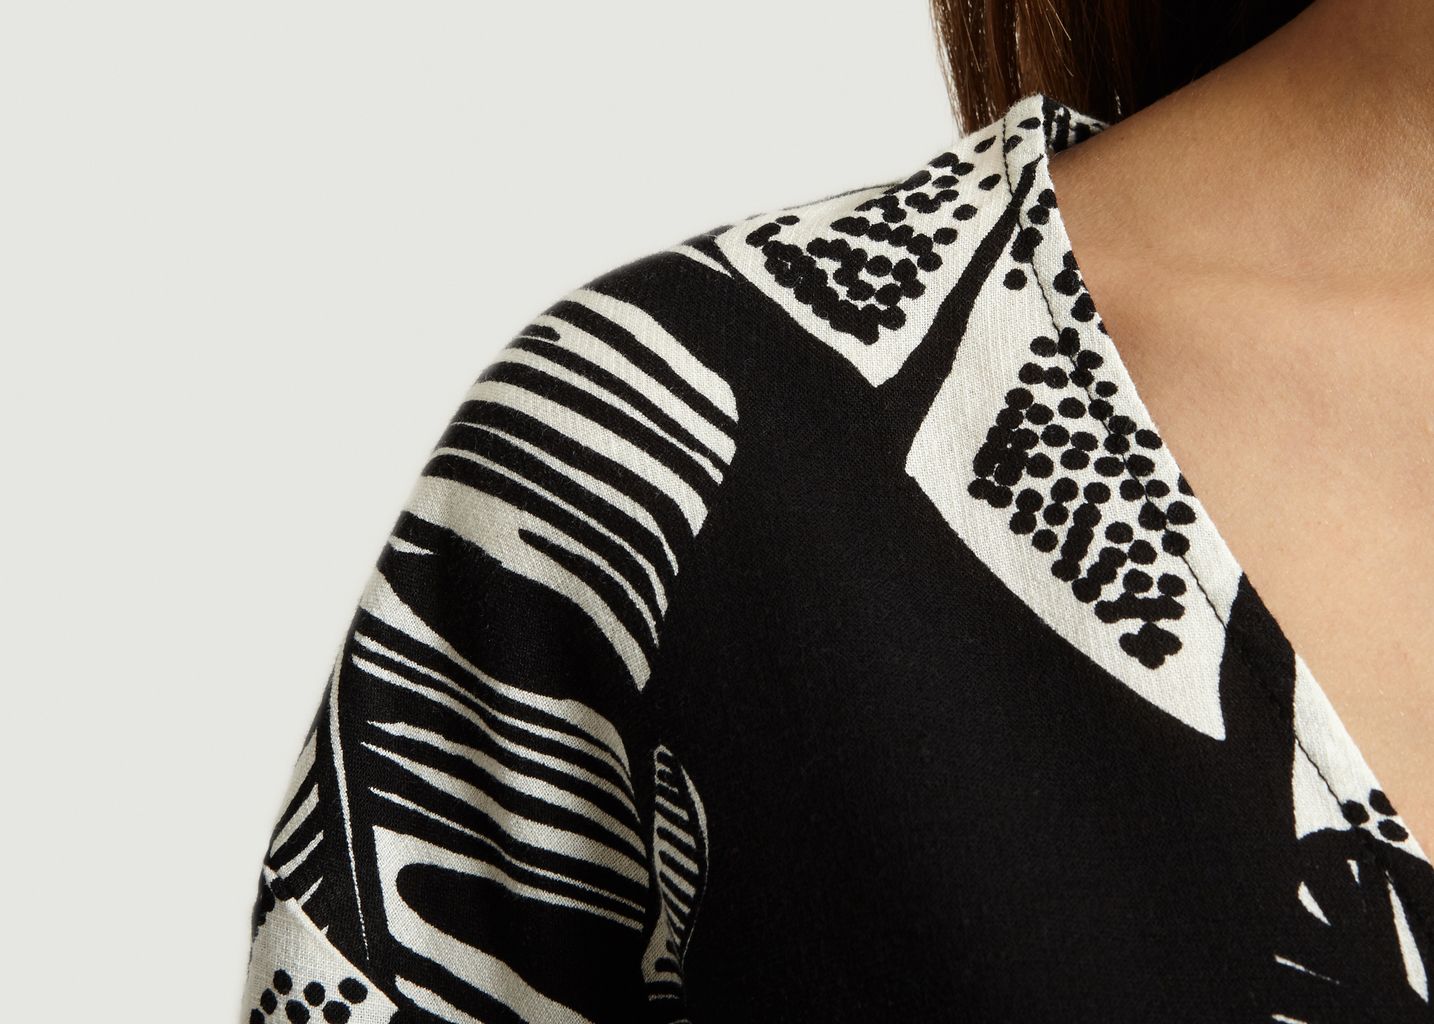 Jungle Printed Blouse - See by Chloé